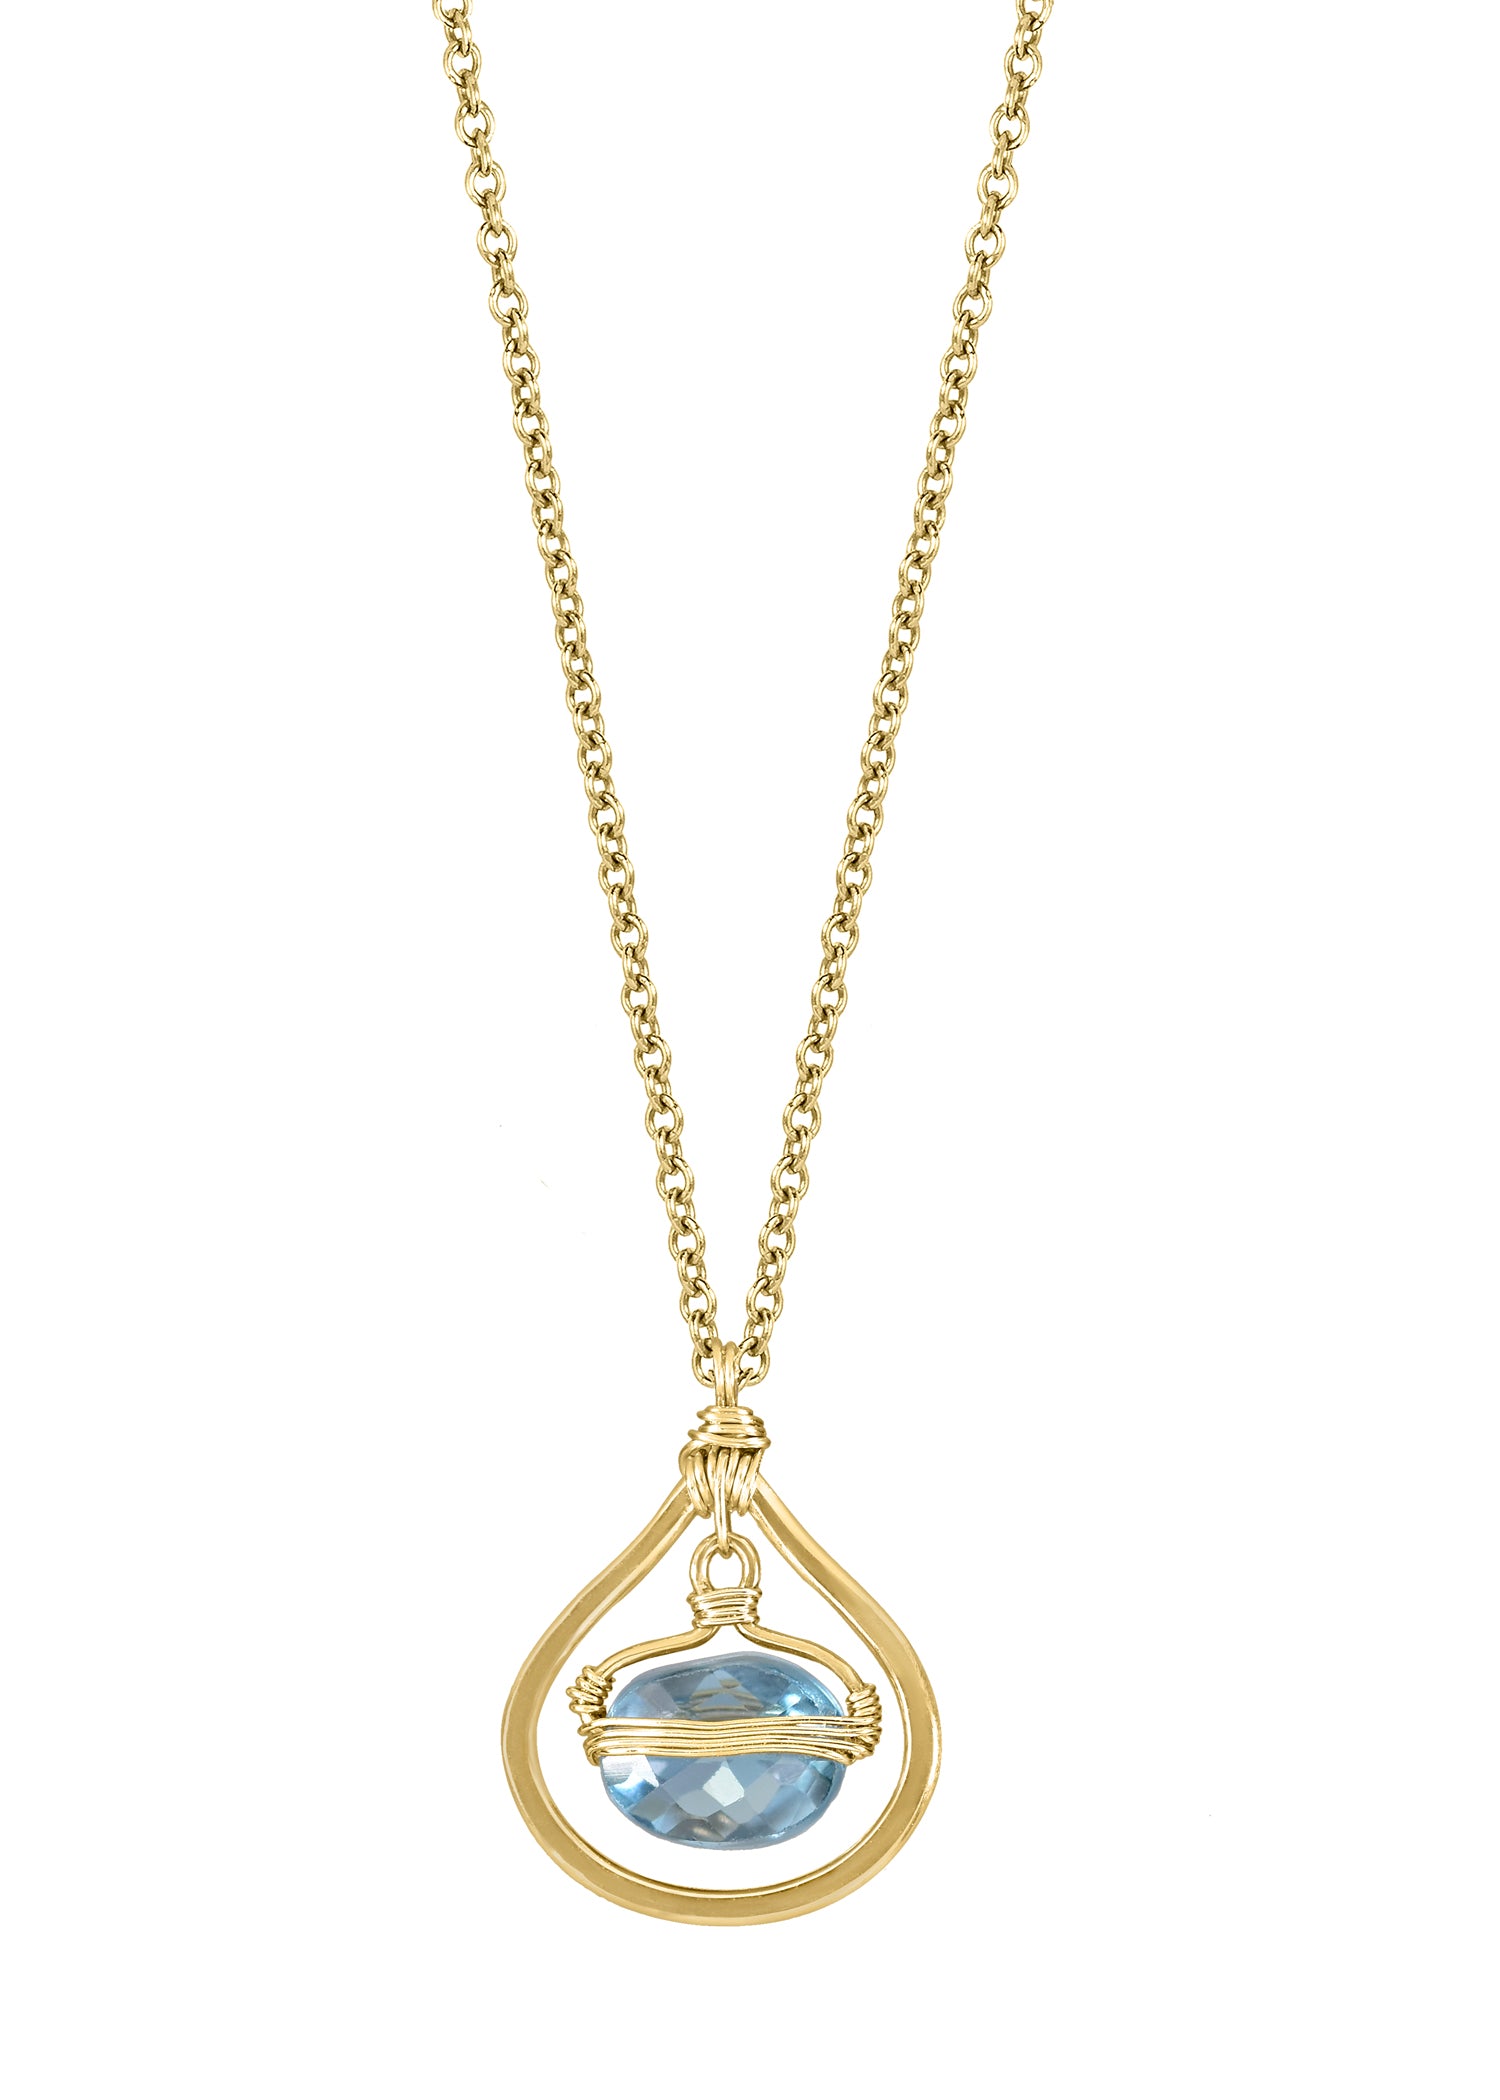 London blue topaz 14k gold fill Necklace measures 16" in length Pendant measures 1/2" in length and 1/2" in width at the widest point Handmade in our Los Angeles studio